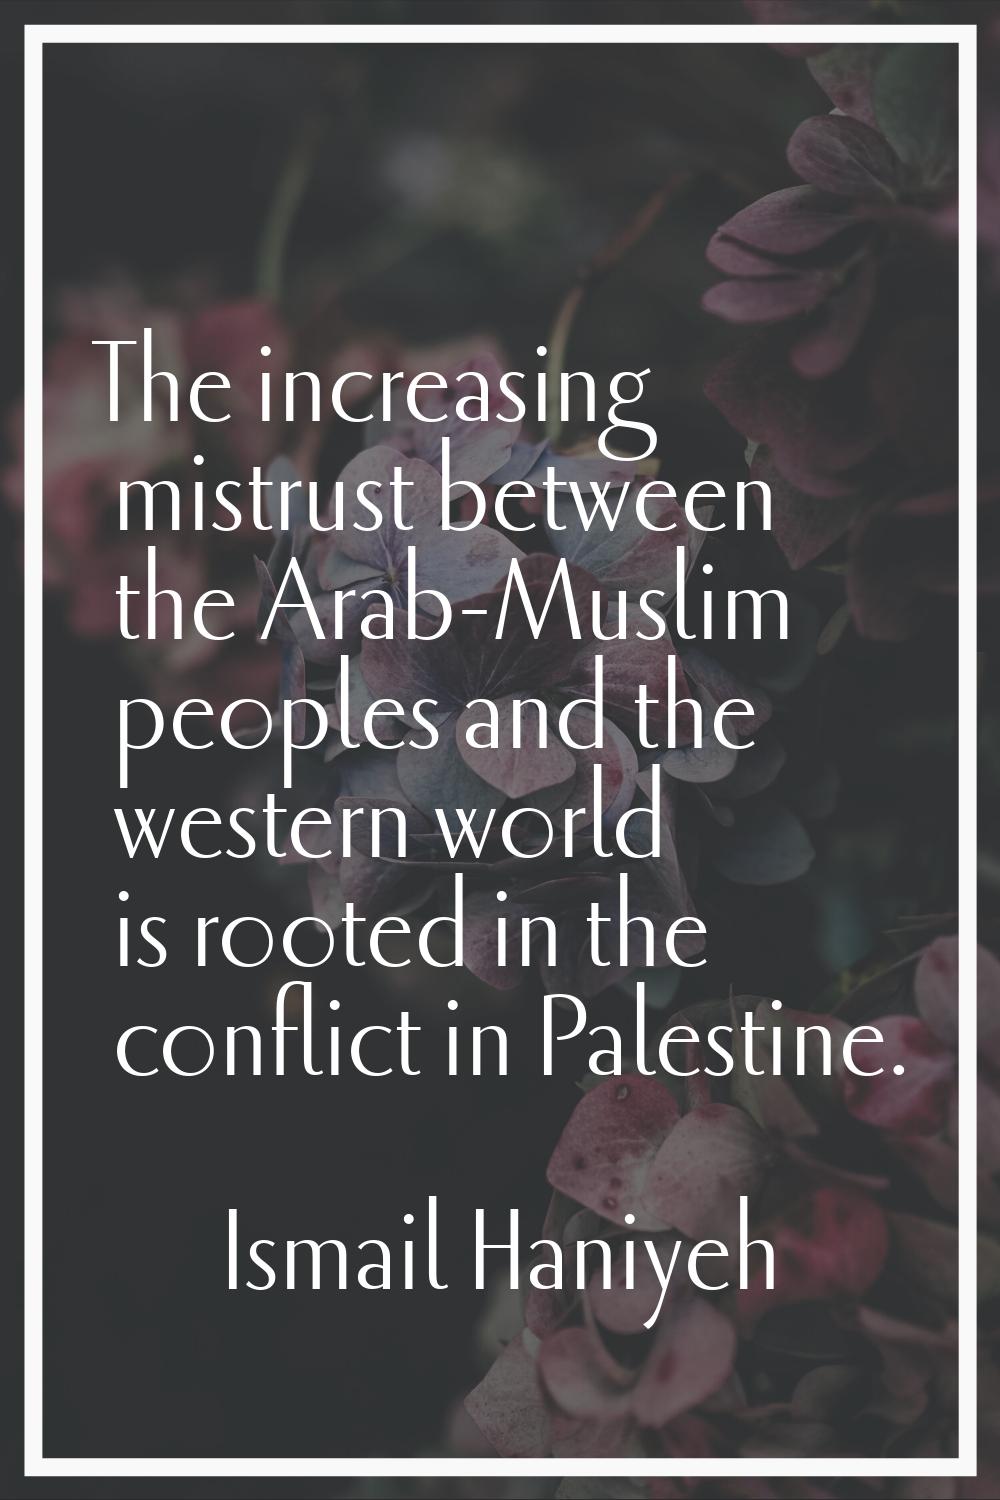 The increasing mistrust between the Arab-Muslim peoples and the western world is rooted in the conf